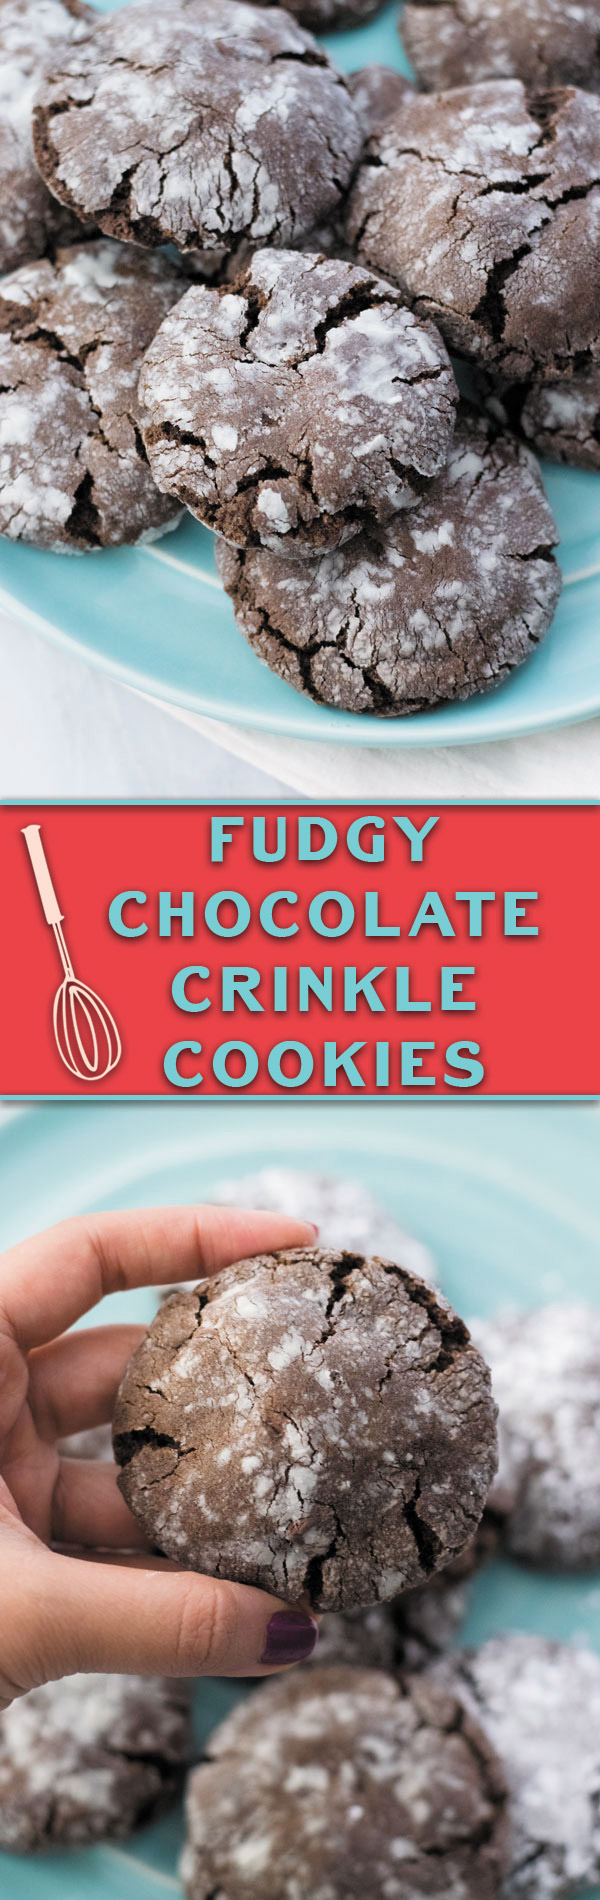 Fudgy Chocolate Crinkle Cookies - Perfect cookies for tea time, these are fudgy with crunchy exterior. My HUSBAND declared them the best cookies I have made so far!